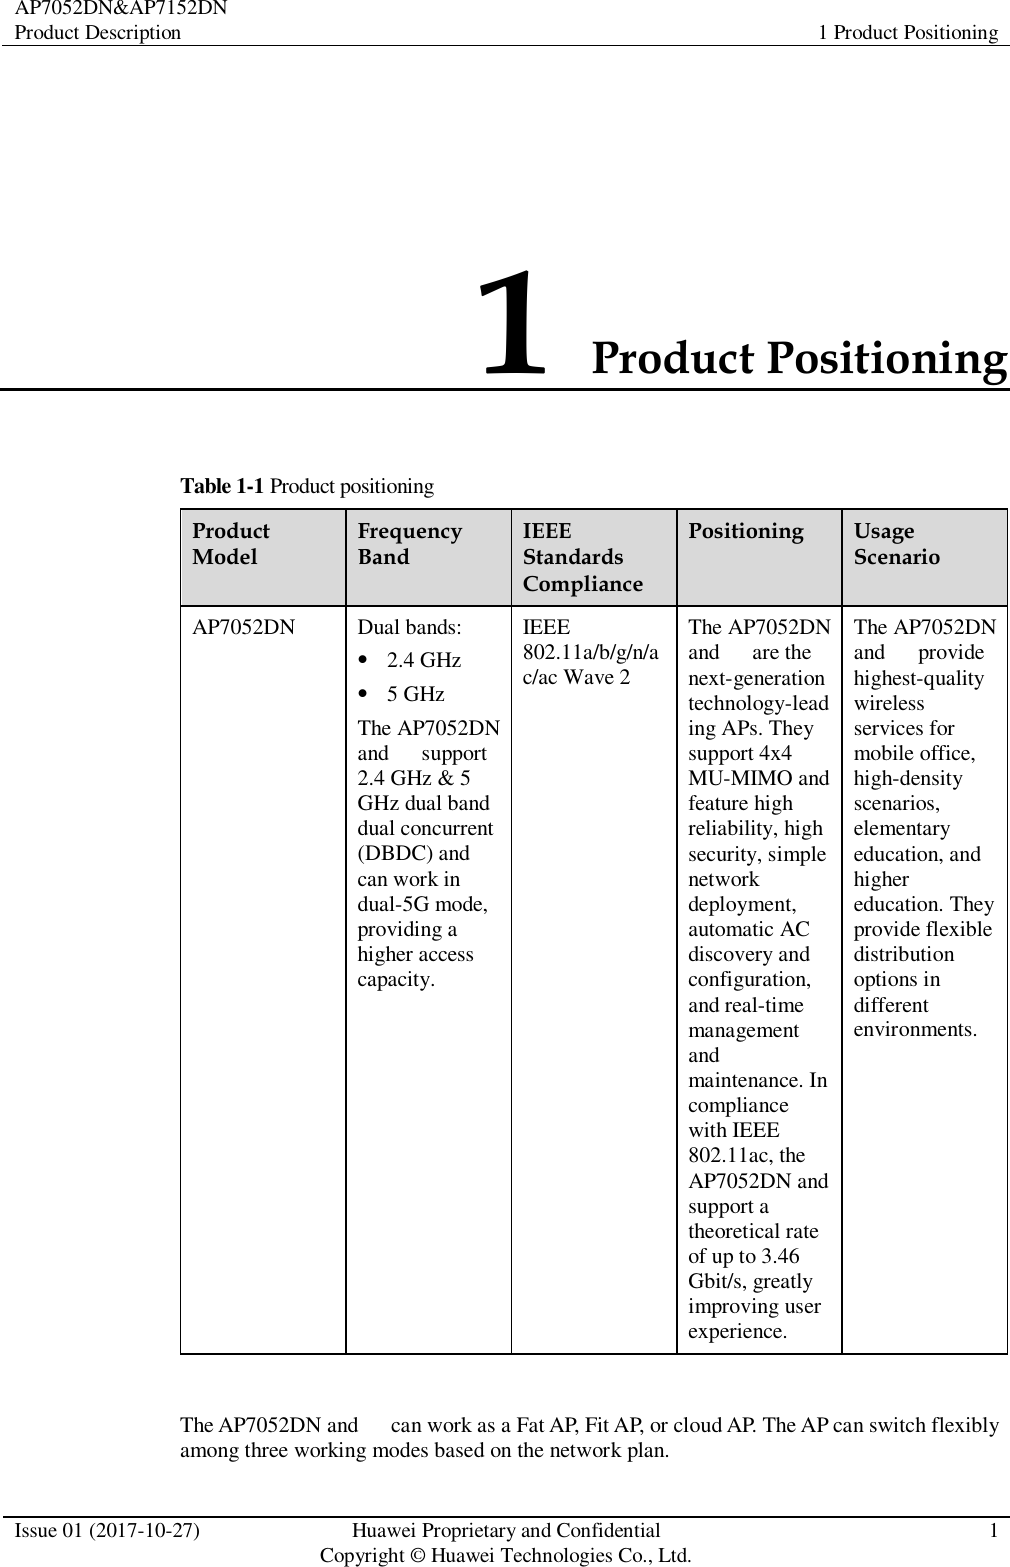 AP7052DN&amp;AP7152DN Product Description 1 Product Positioning  Issue 01 (2017-10-27) Huawei Proprietary and Confidential                                     Copyright © Huawei Technologies Co., Ltd. 1  1 Product Positioning Table 1-1 Product positioning Product Model Frequency Band IEEE Standards Compliance Positioning Usage Scenario AP7052DN    Dual bands:  2.4 GHz  5 GHz The AP7052DN and      support 2.4 GHz &amp; 5 GHz dual band dual concurrent (DBDC) and can work in dual-5G mode, providing a higher access capacity. IEEE 802.11a/b/g/n/ac/ac Wave 2 The AP7052DN and      are the next-generation technology-leading APs. They support 4x4 MU-MIMO and feature high reliability, high security, simple network deployment, automatic AC discovery and configuration, and real-time management and maintenance. In compliance with IEEE 802.11ac, the AP7052DN and     support a theoretical rate of up to 3.46 Gbit/s, greatly improving user experience. The AP7052DN and      provide highest-quality wireless services for mobile office, high-density scenarios, elementary education, and higher education. They provide flexible distribution options in different environments.  The AP7052DN and      can work as a Fat AP, Fit AP, or cloud AP. The AP can switch flexibly among three working modes based on the network plan. 